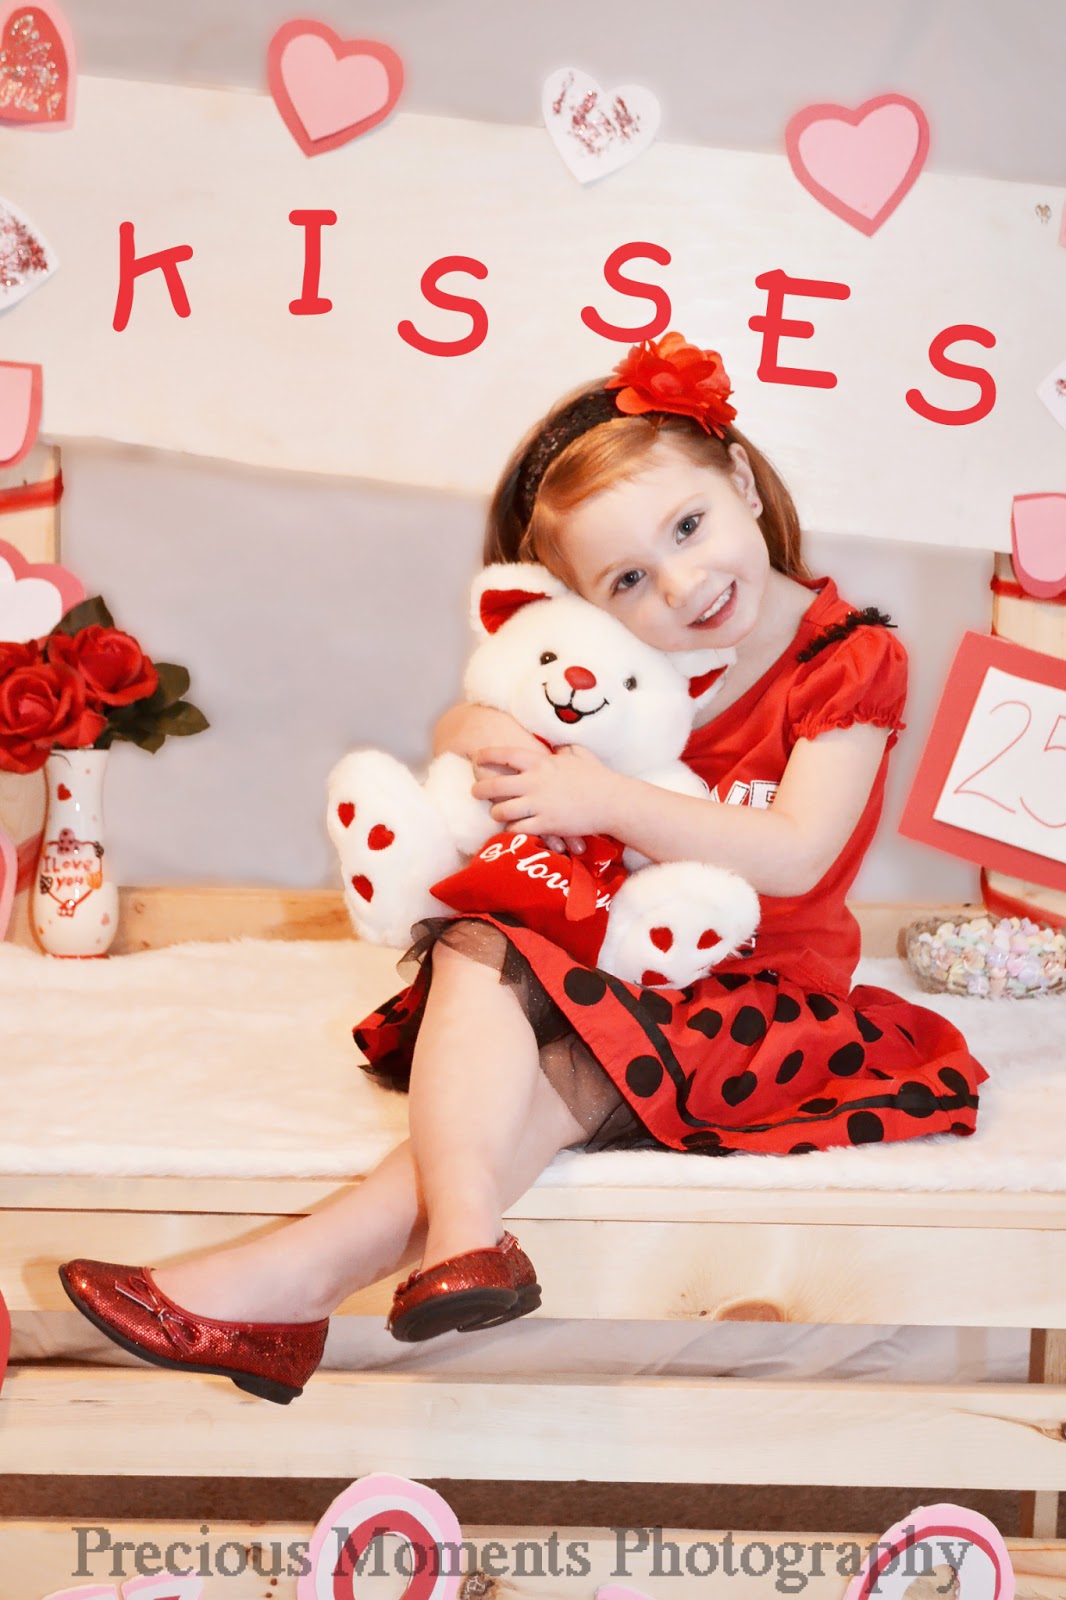 Precious Moments Photography: Valentine's Day Ad